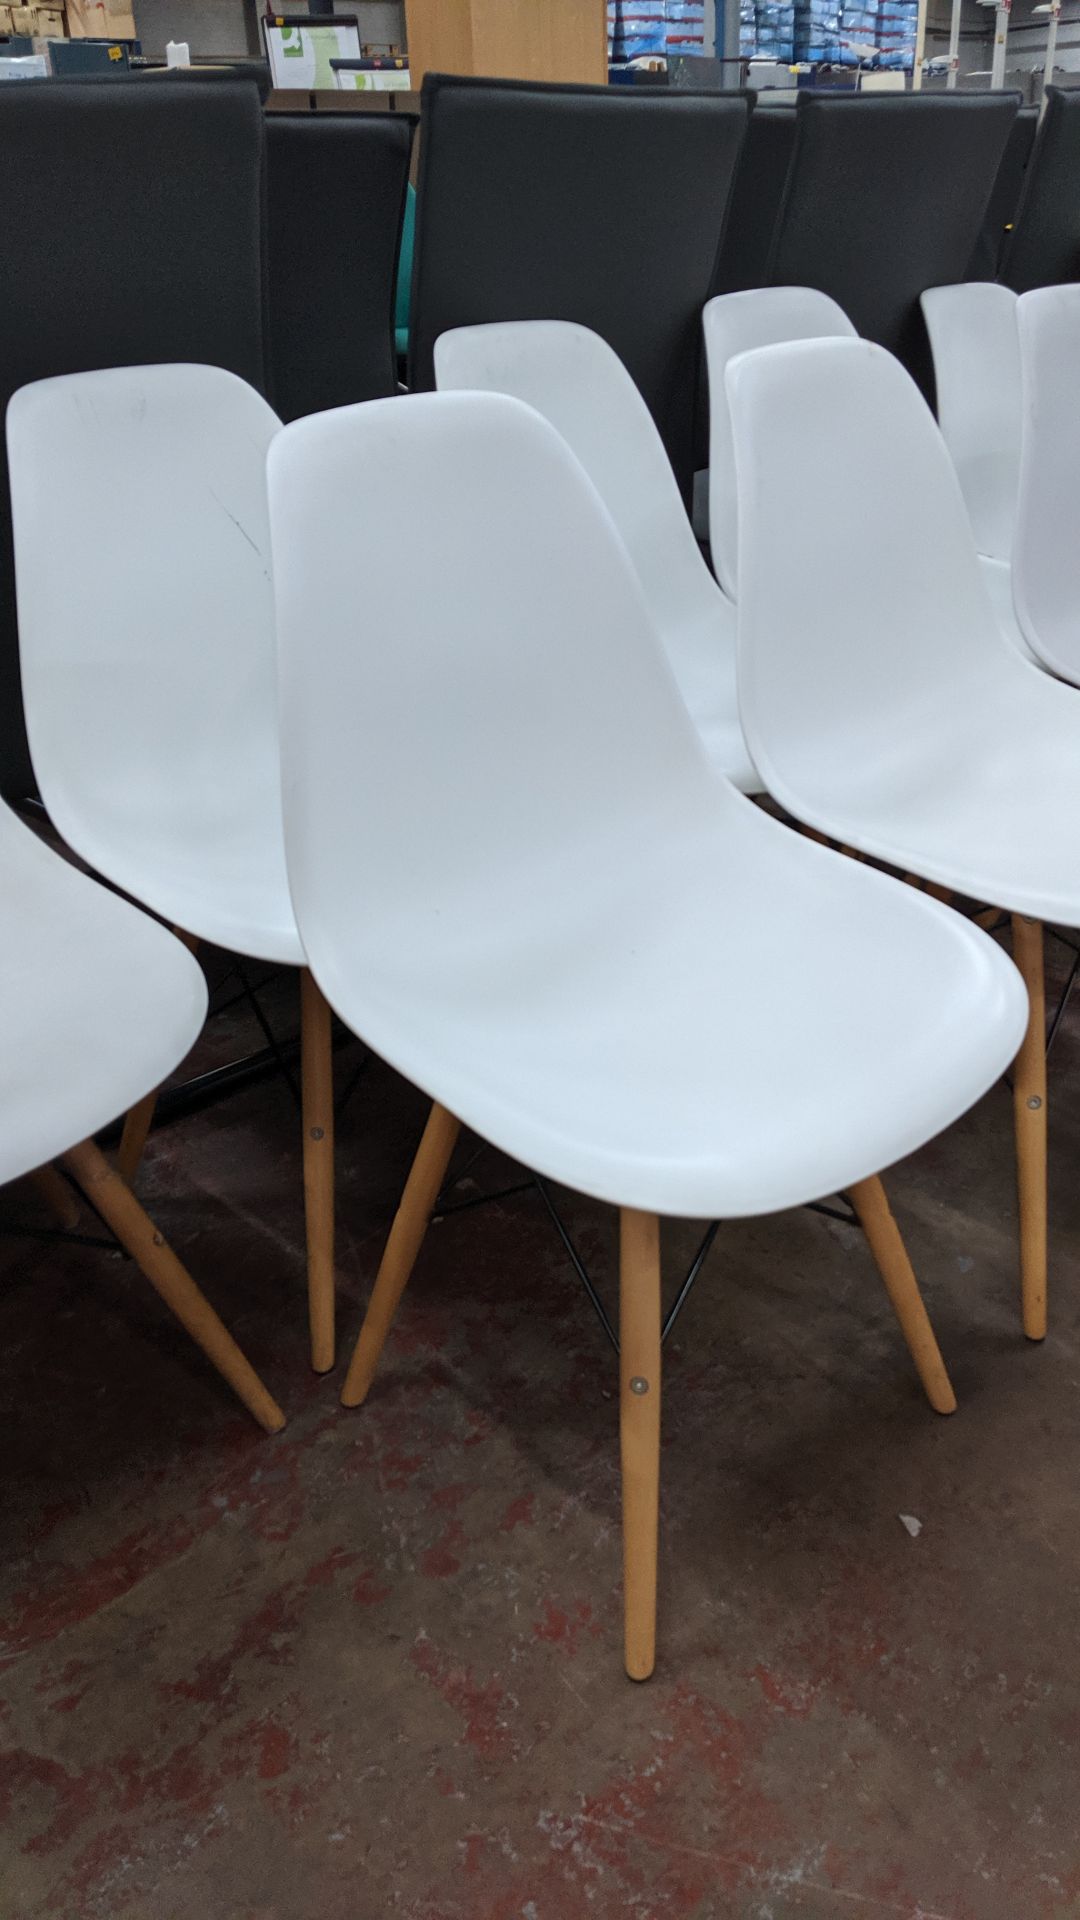 9 off white chairs with wooden legs NB. Lots 342 - 344 consist of different quantities of the same - Image 5 of 6